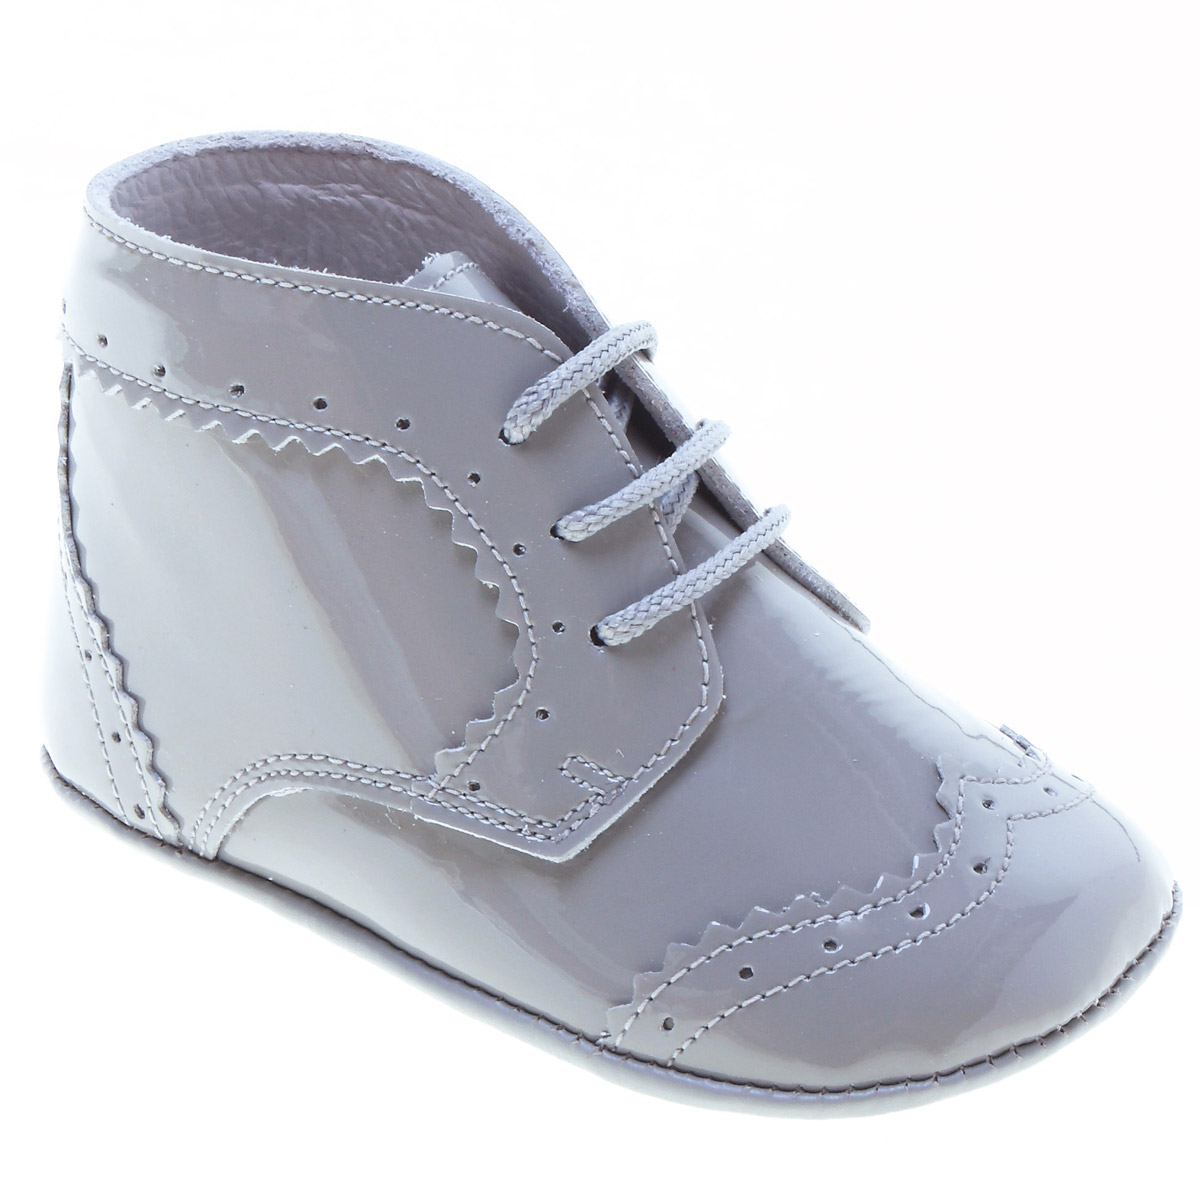 gray baby boy shoes